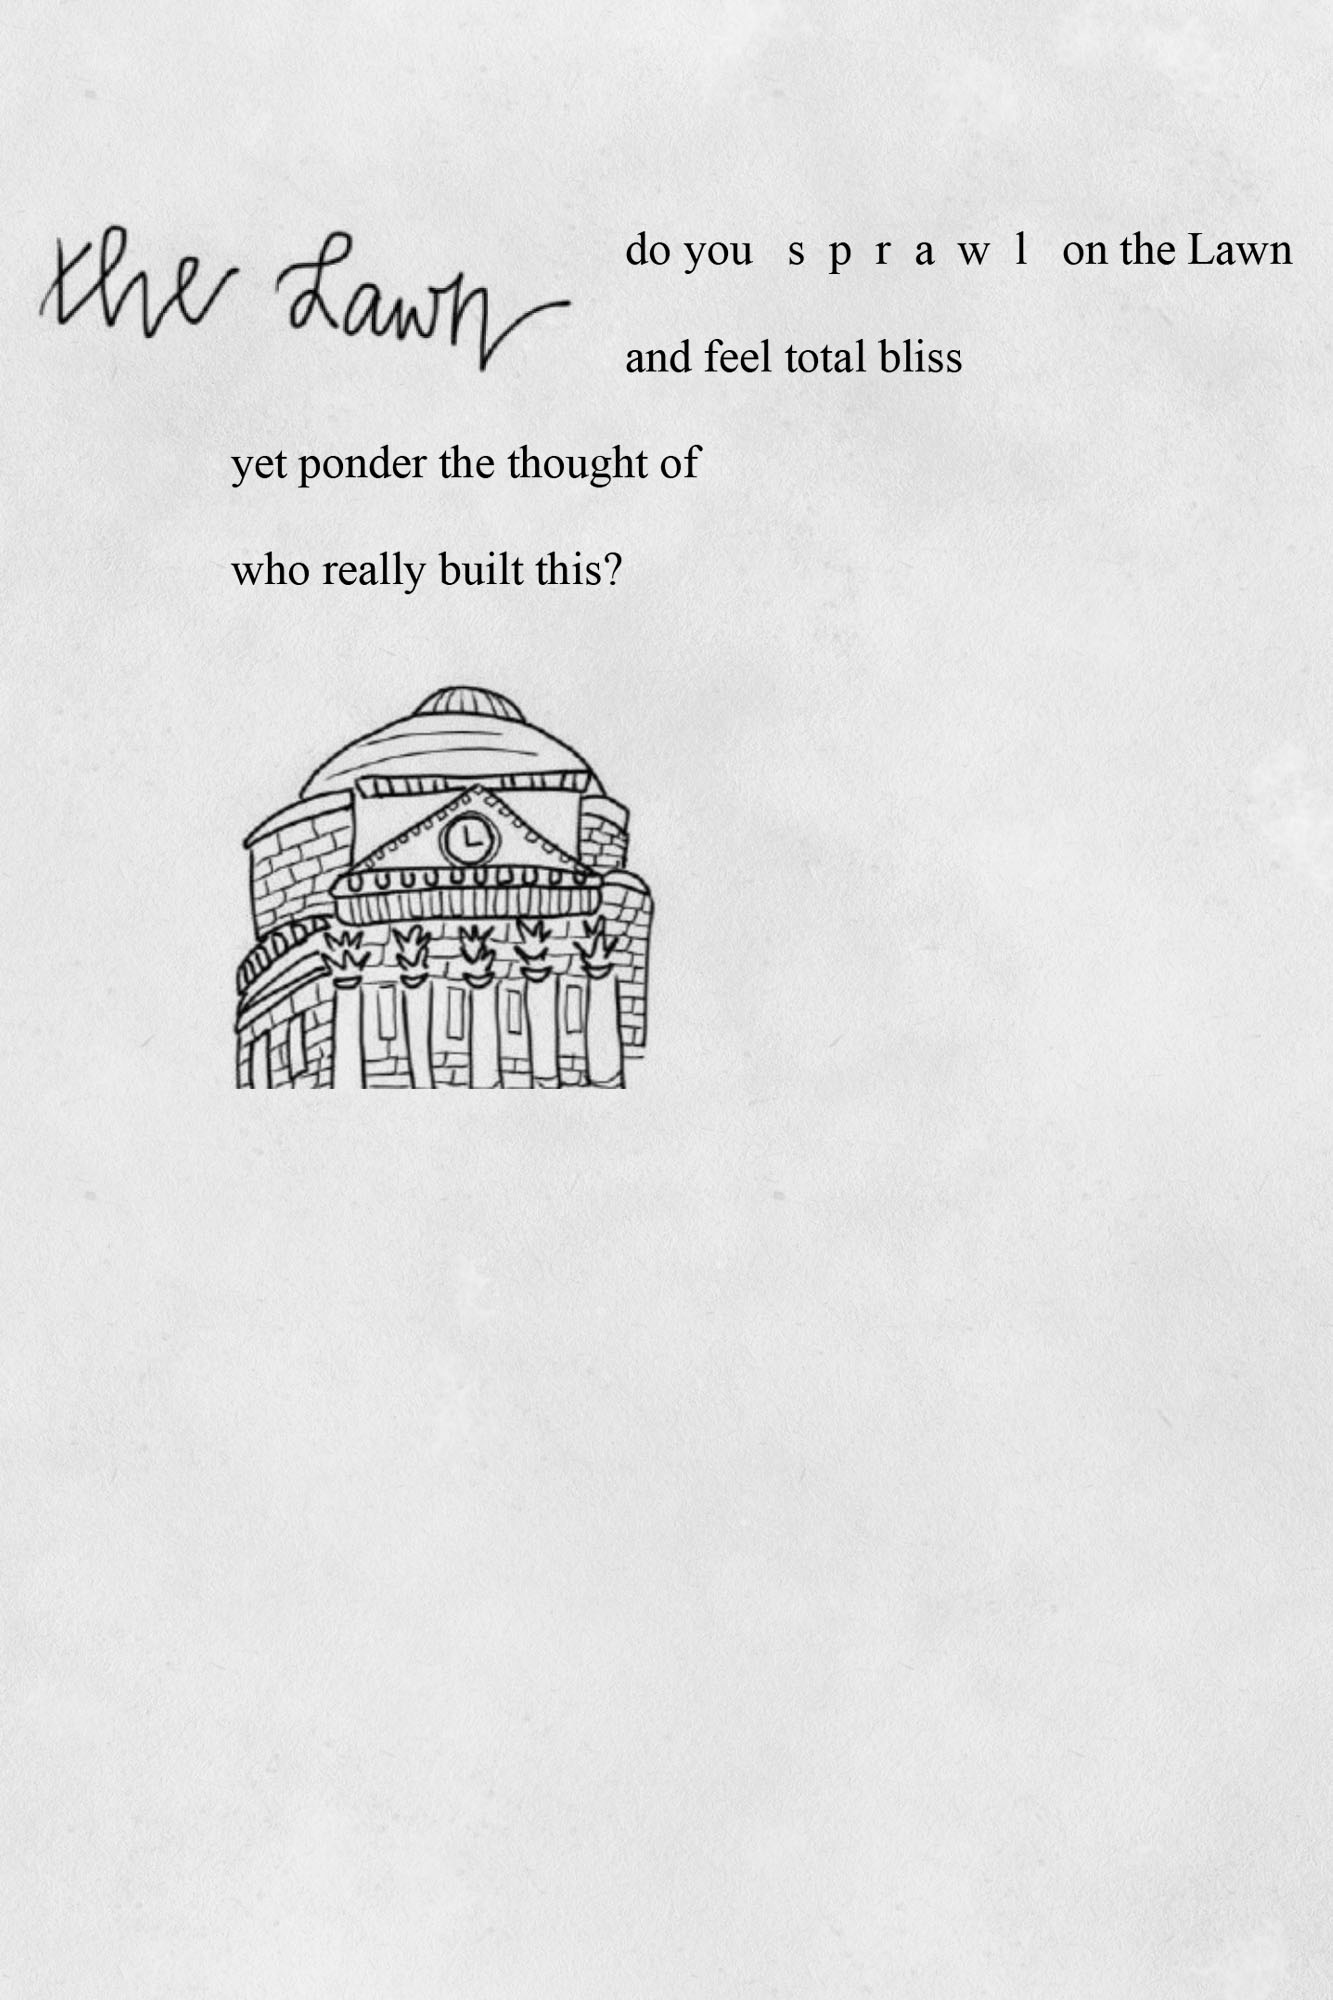 Free Hand drawing of the Rotunda with a poem that reads: The Lawn do you sprawl on the lawn and feel total bliss yet ponder the though of who really built this?